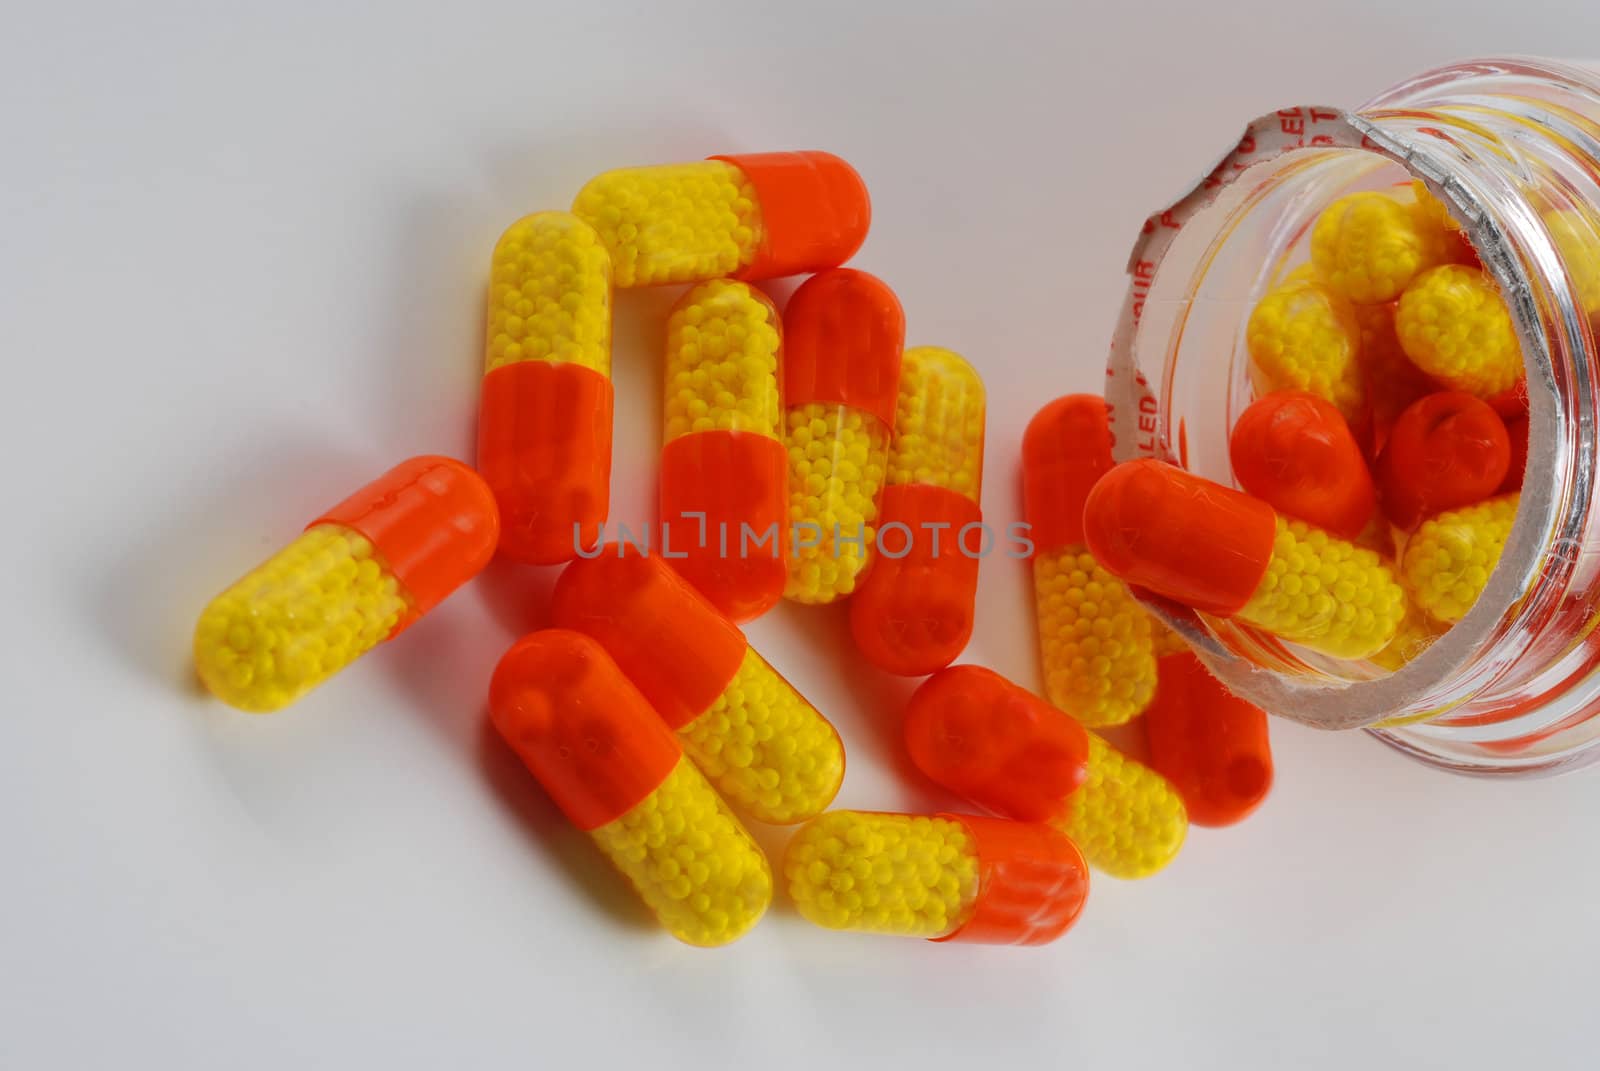 Stock pictures of drugs and pharmaceutical products for health reasons